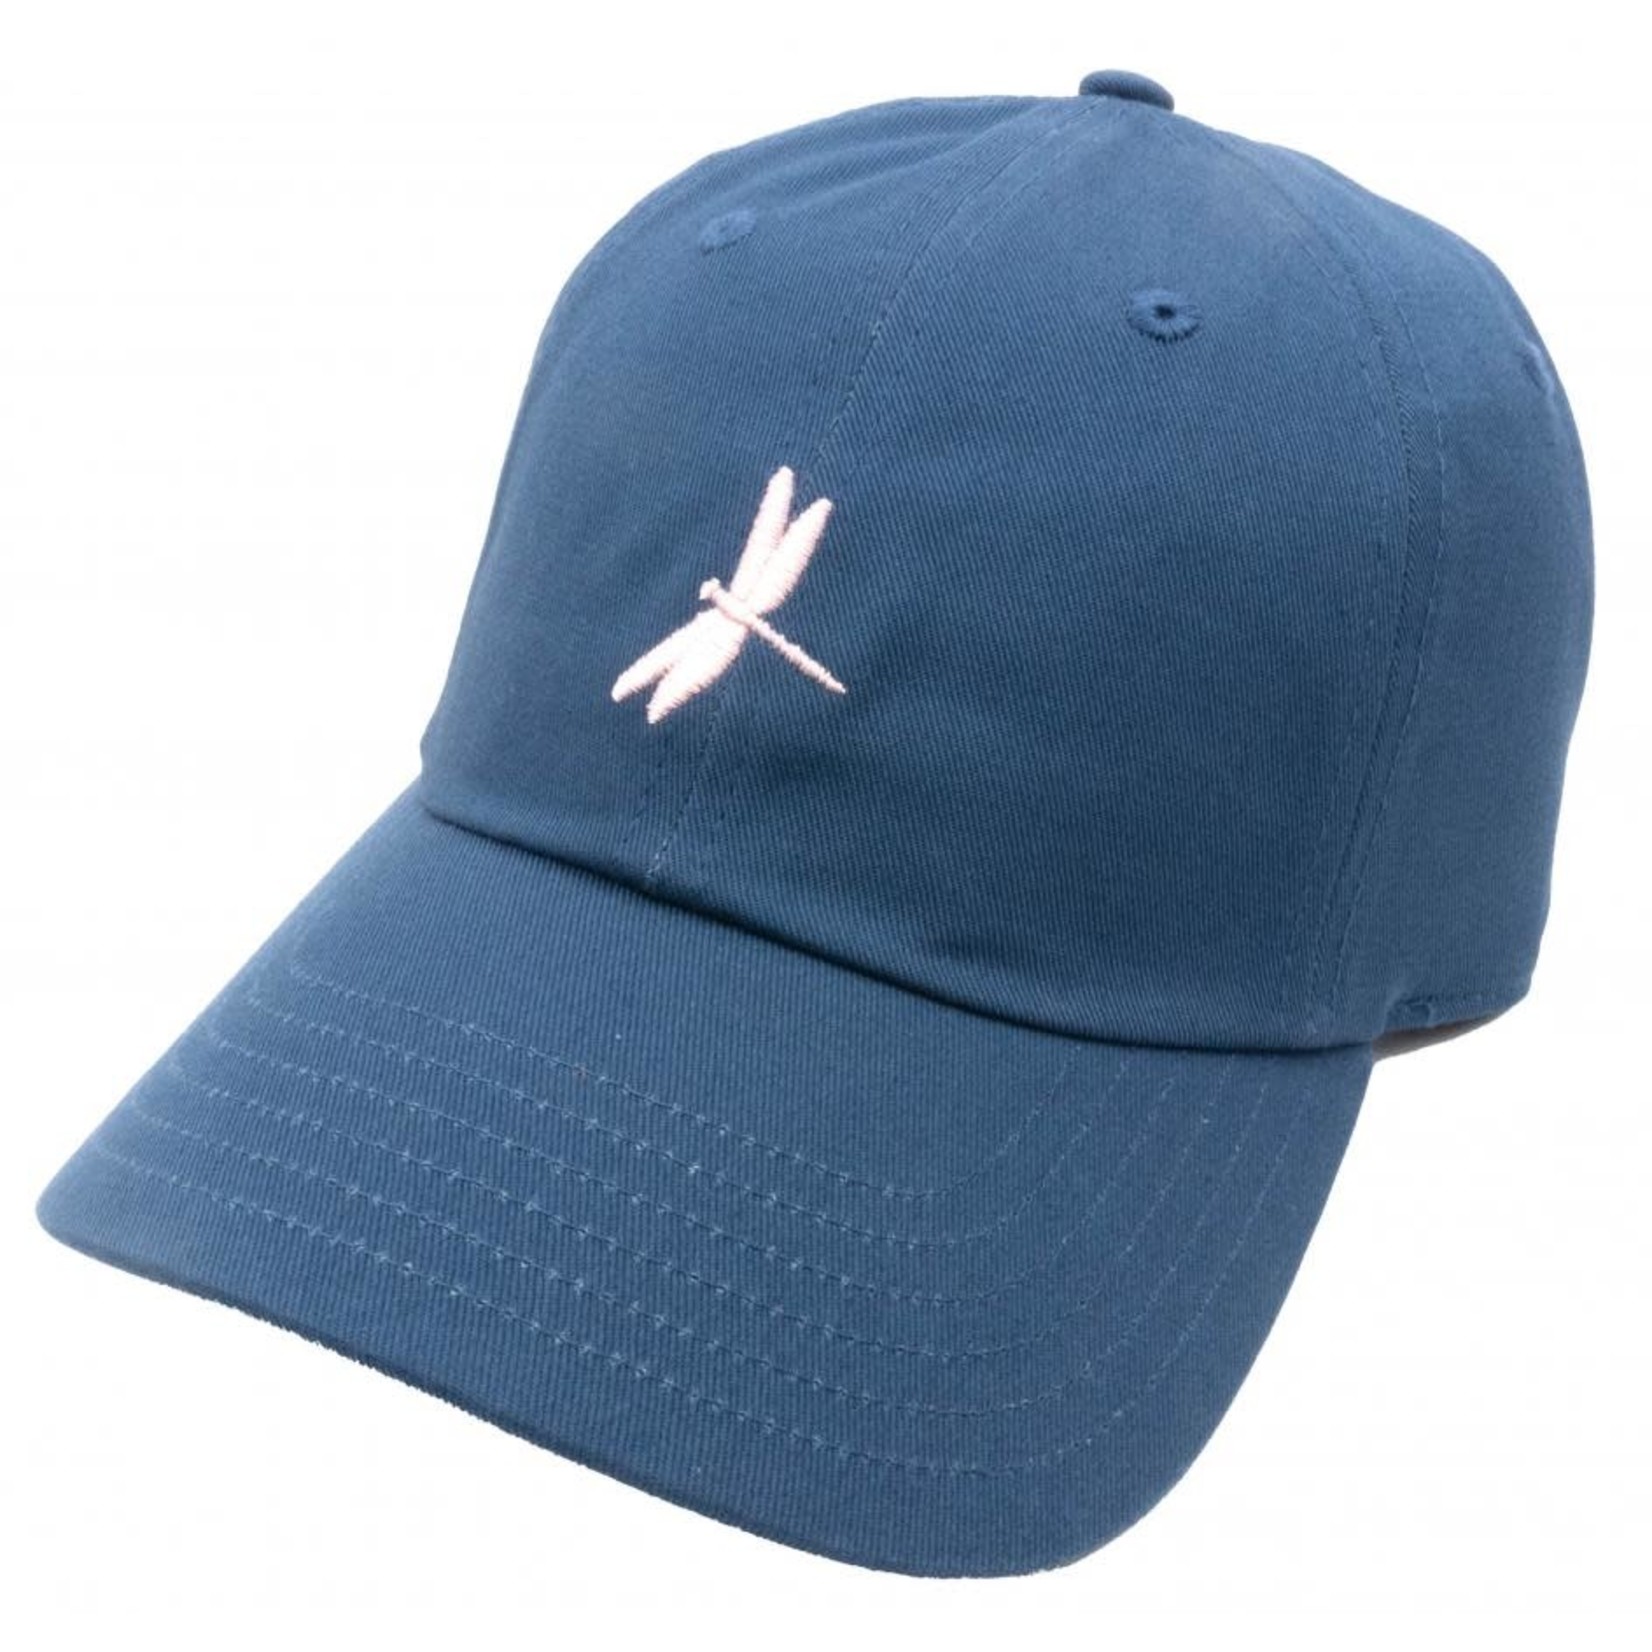 ORVIS Orvis Woman's Dragonfly Embroidery Hat Blue Pink